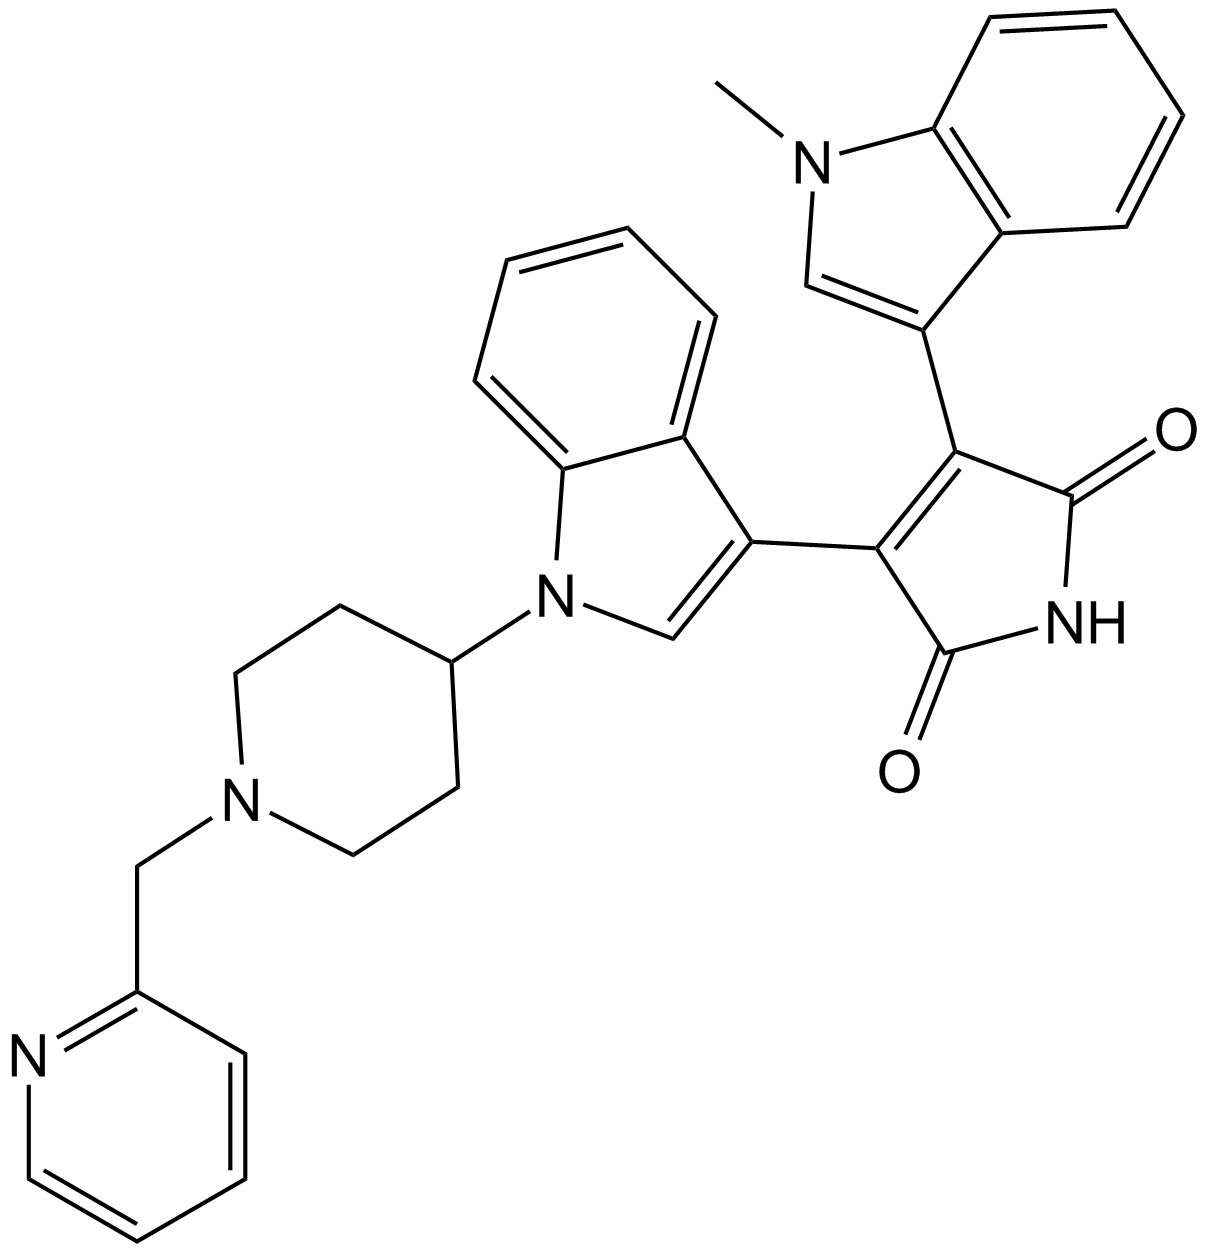 Enzastaurin (LY317615)  Chemical Structure